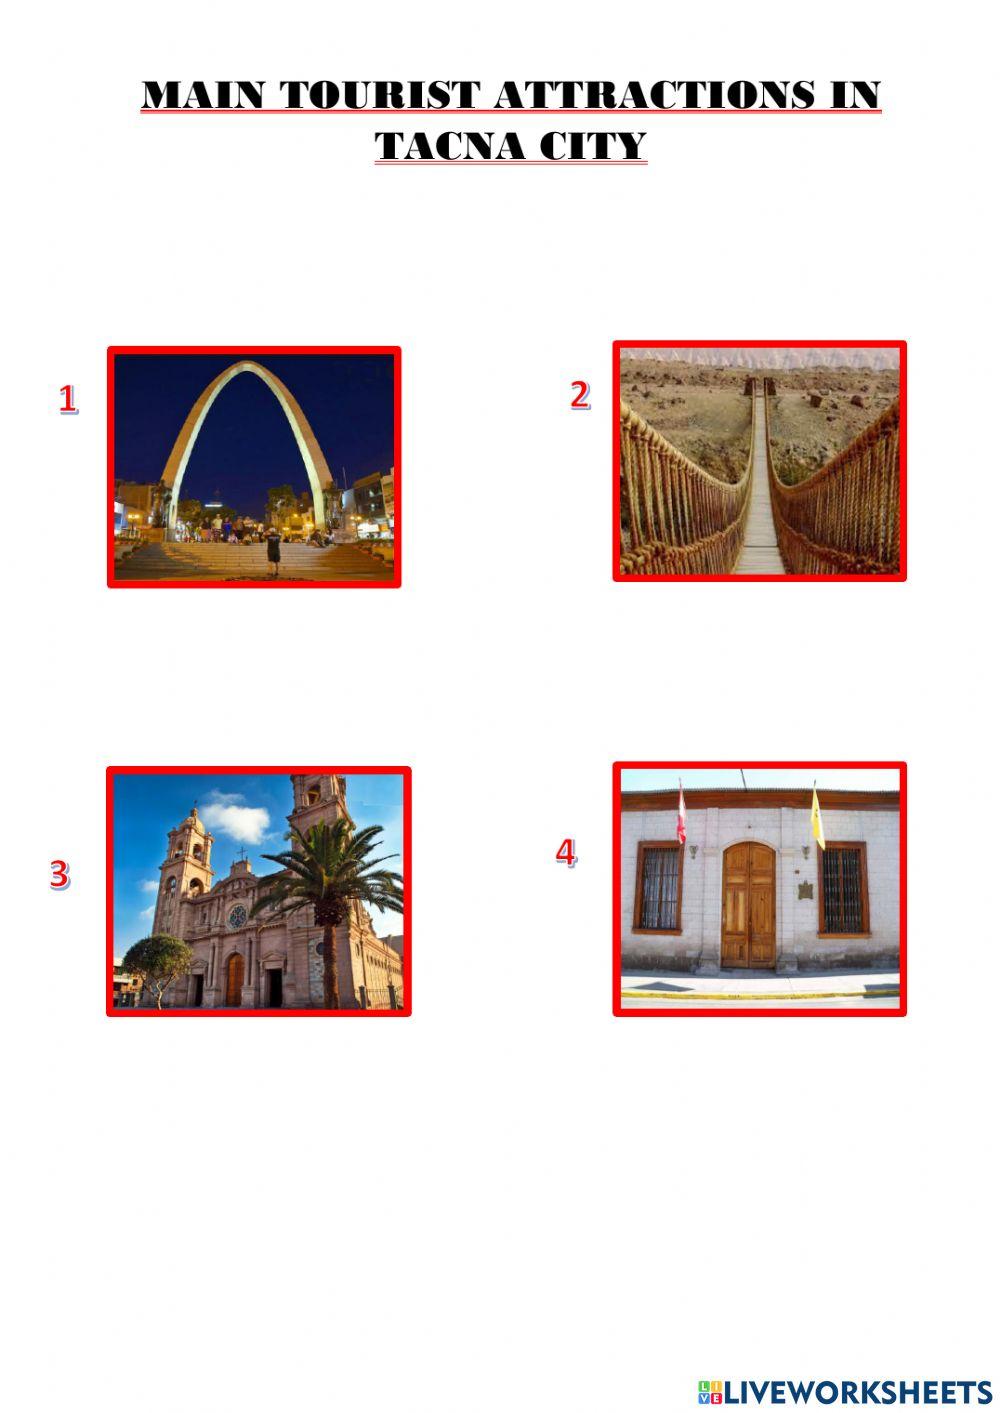 Main tourist attractions in tacna city